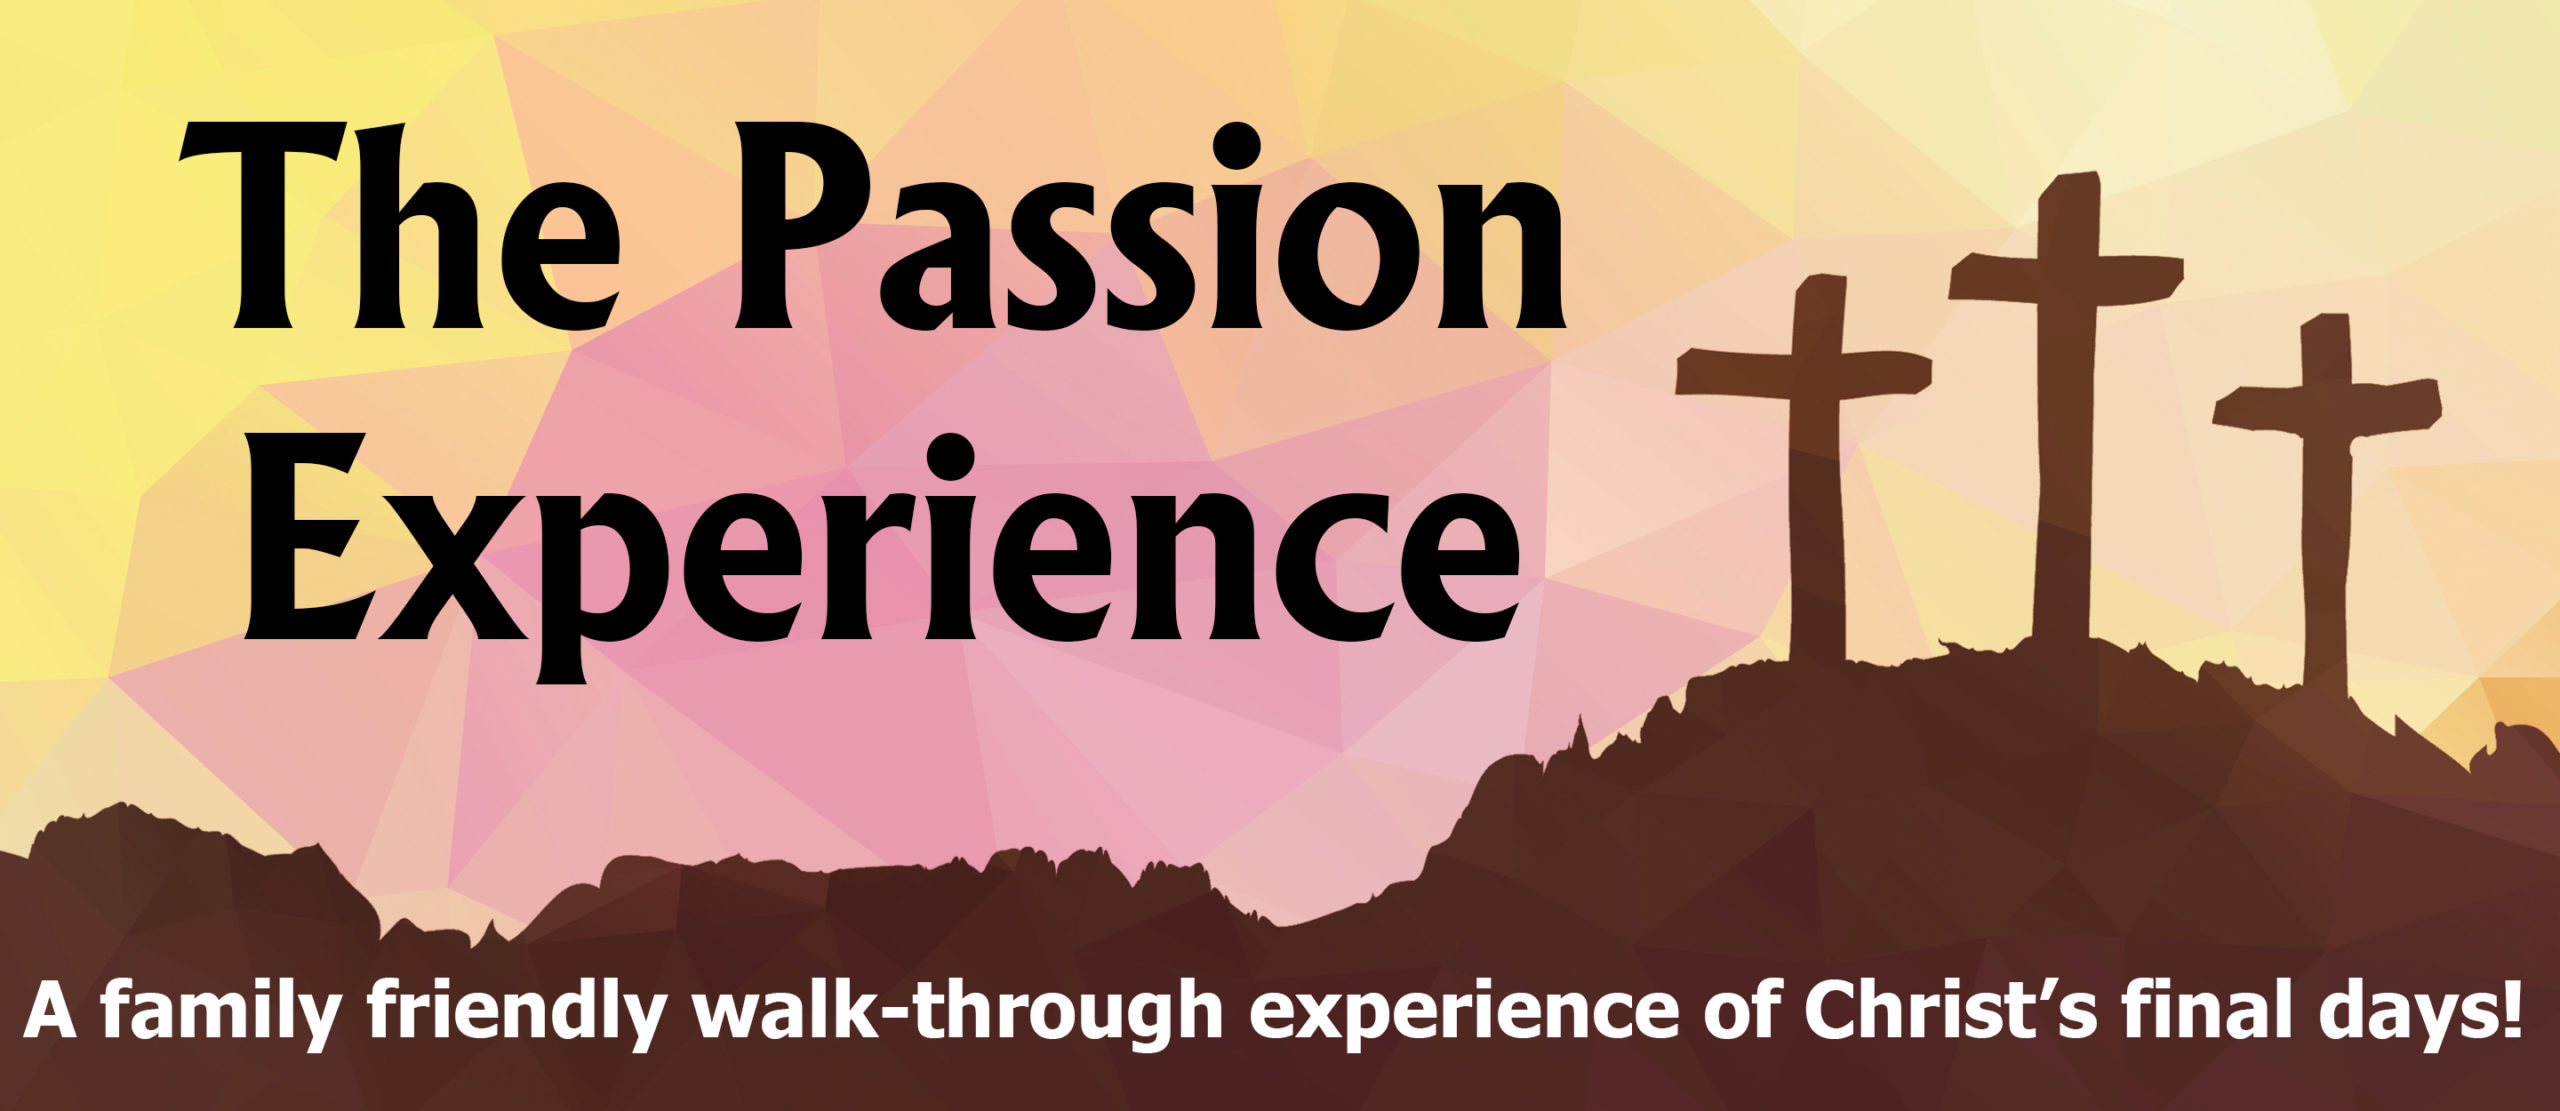 The Passion Experience: A family friendly walk-through experience of Christ's final days!